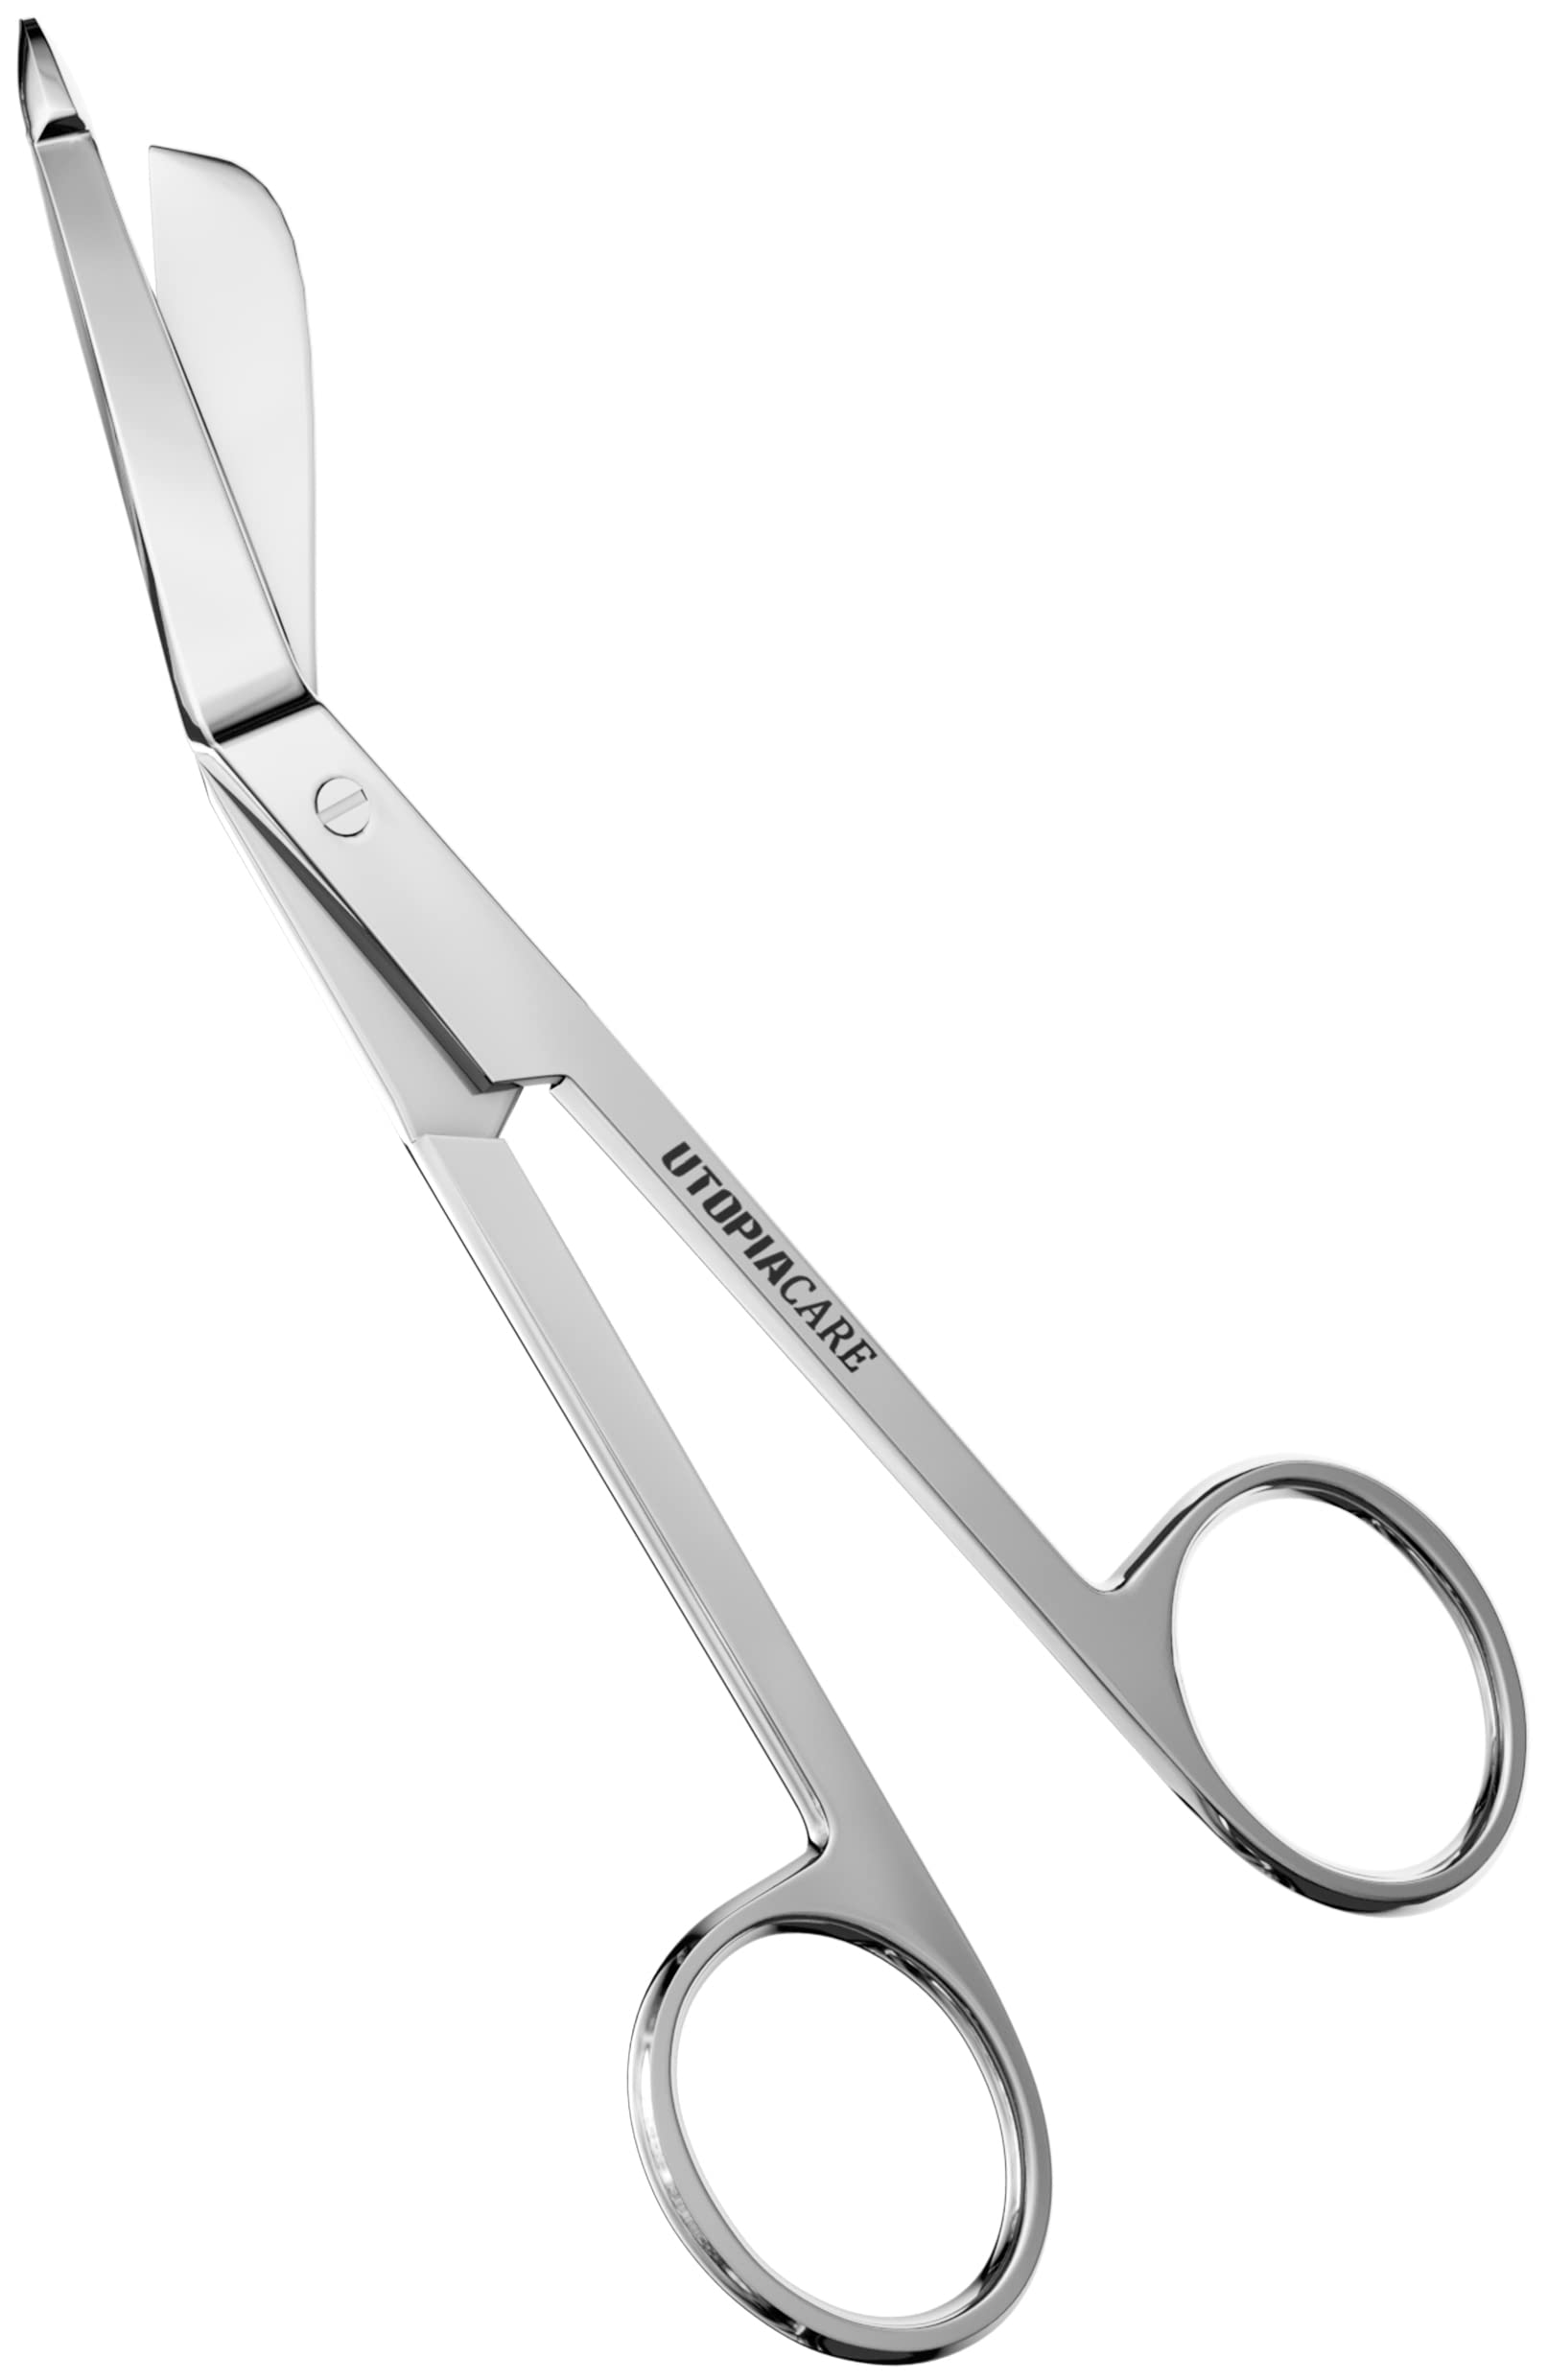 Utopia Care Angled Lister Bandage Scissors, Stainless Steel 5.5 inch, 100%  Stainless Steel Resists Tarnish and Wear, Easy to Disinfect, Perfect for  Crafting, Medical Care, and Home Nursing